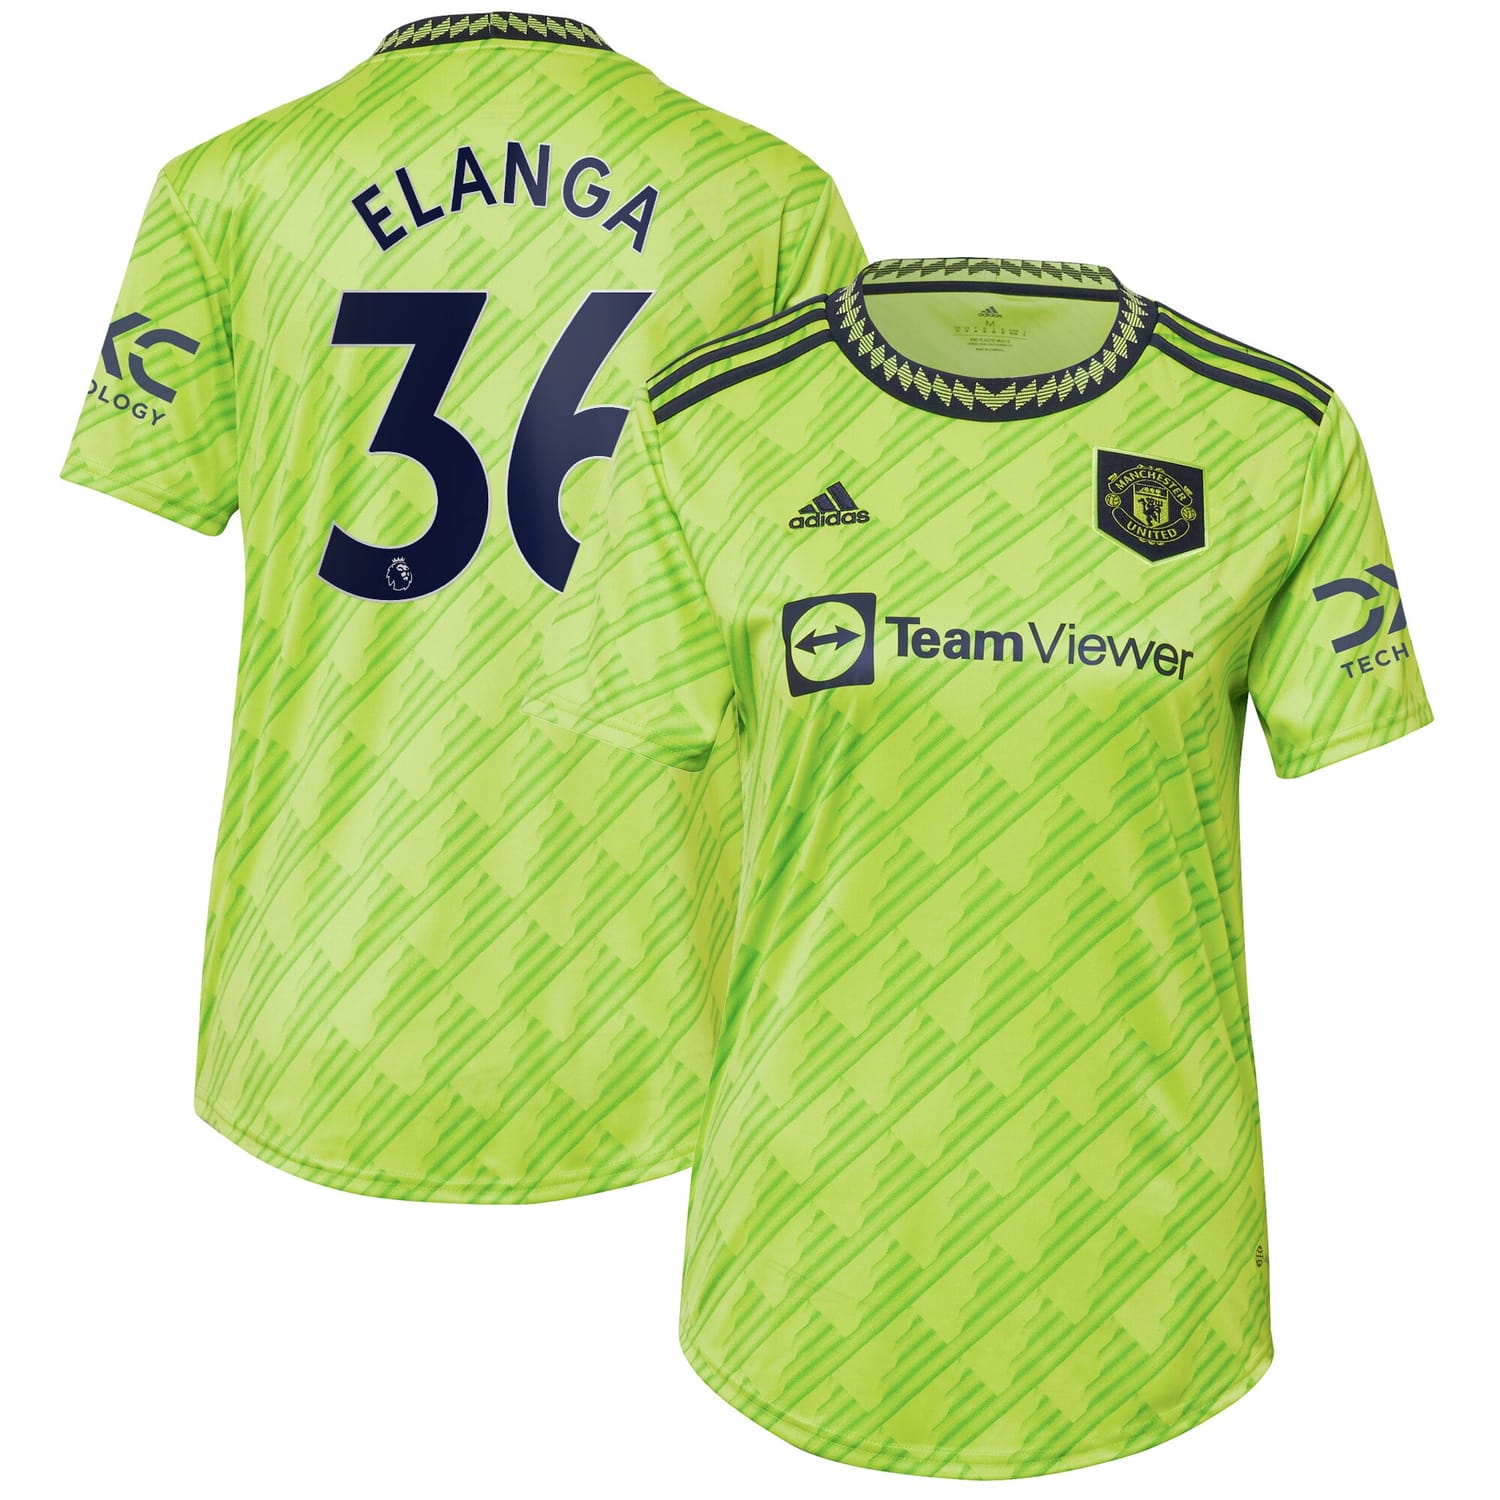 Premier League Manchester United Third Jersey Shirt Neon Green 2022-23 player Anthony Elanga printing for Women